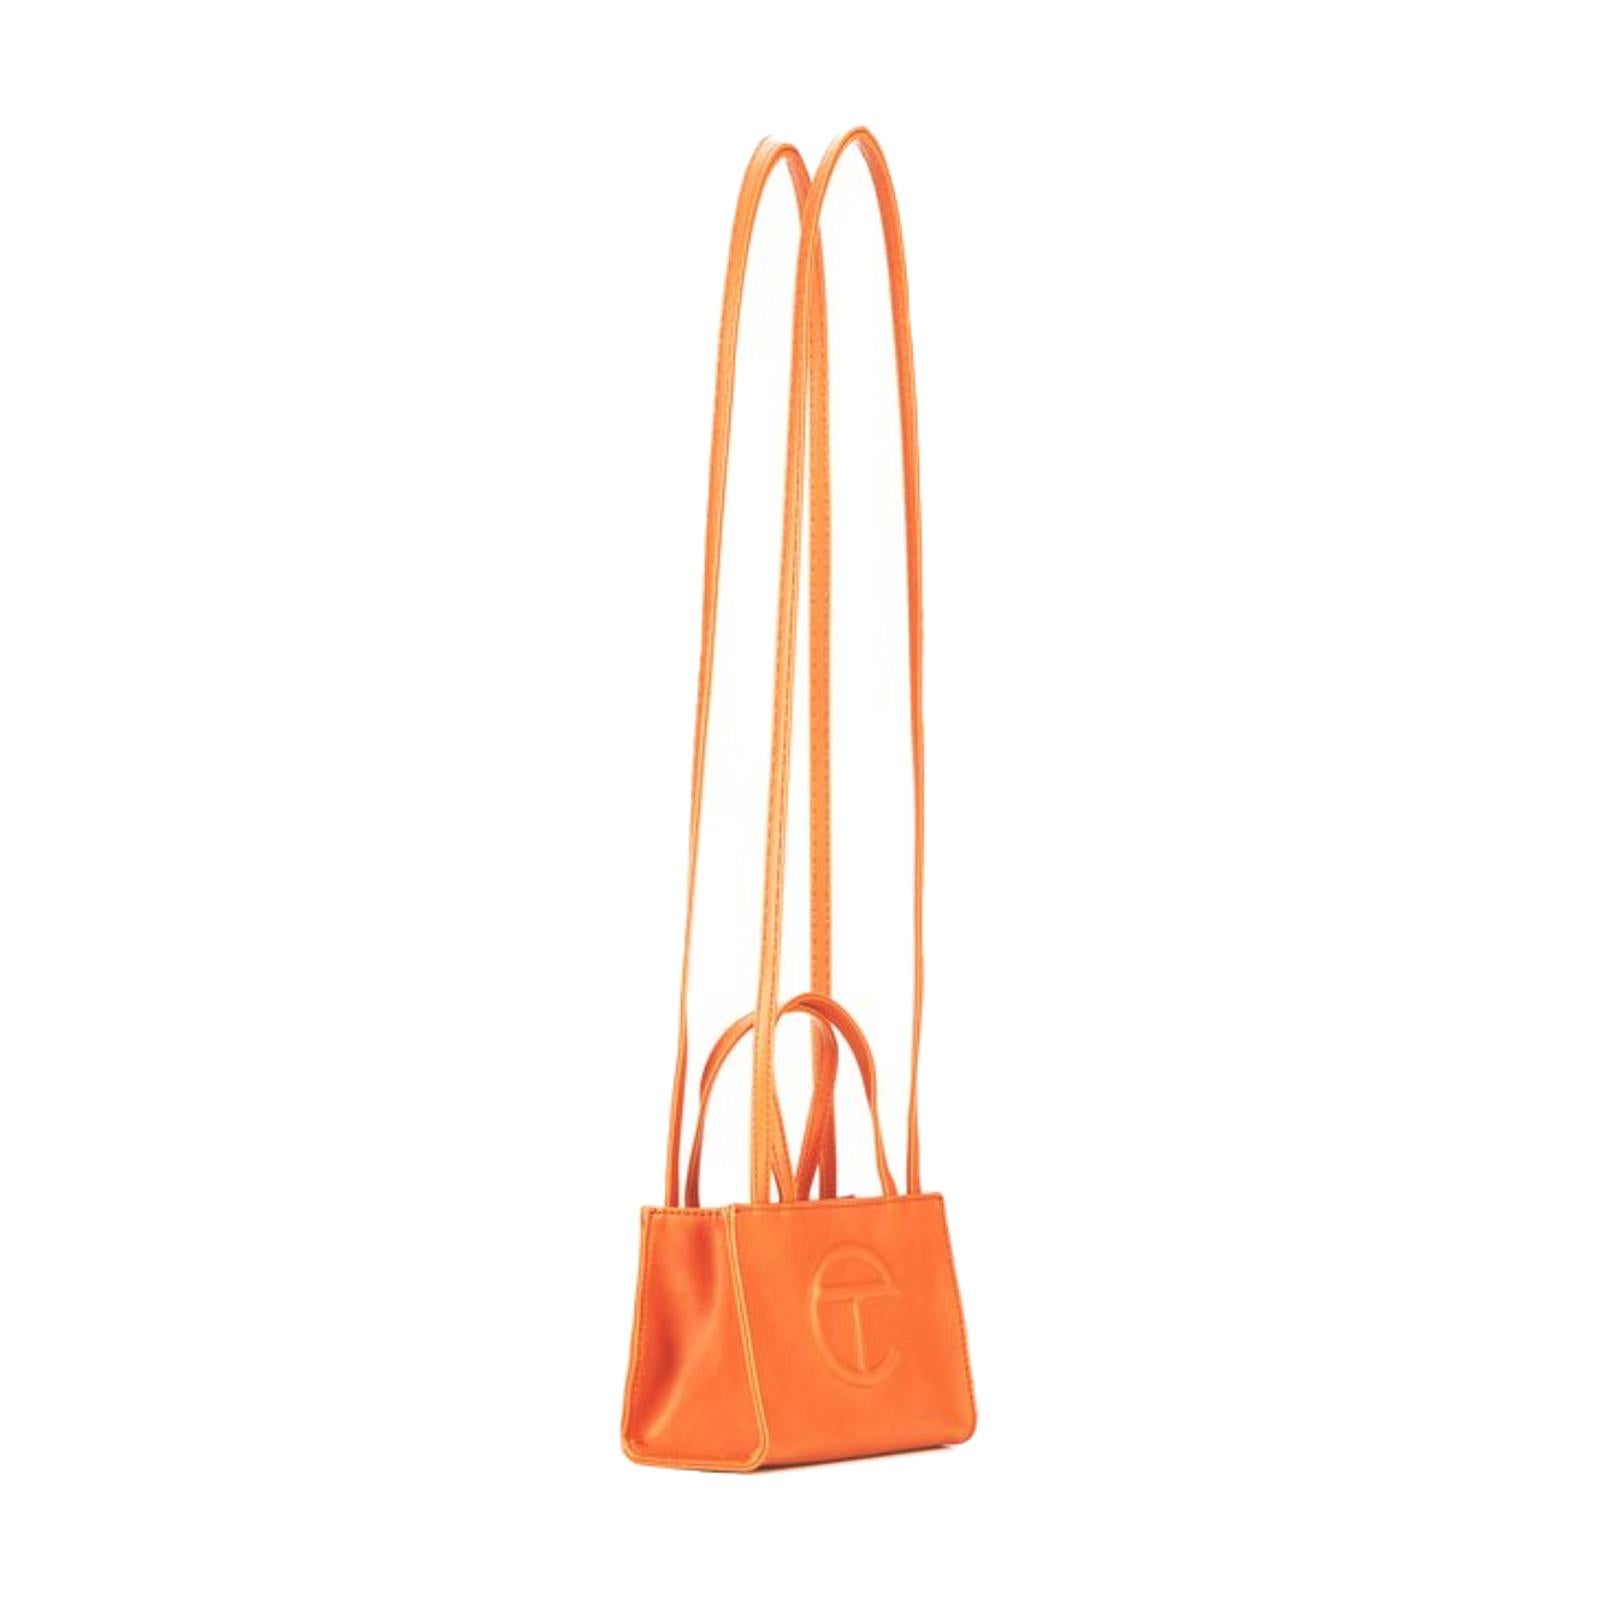 This bag is made with vegan/faux leather and twill interior lining. Featuring a double strap (handles and cross-body straps), embossed logo, and magnetic snap closure. The bag is packaged in a 100% cotton drawstring dust bag with screen printed